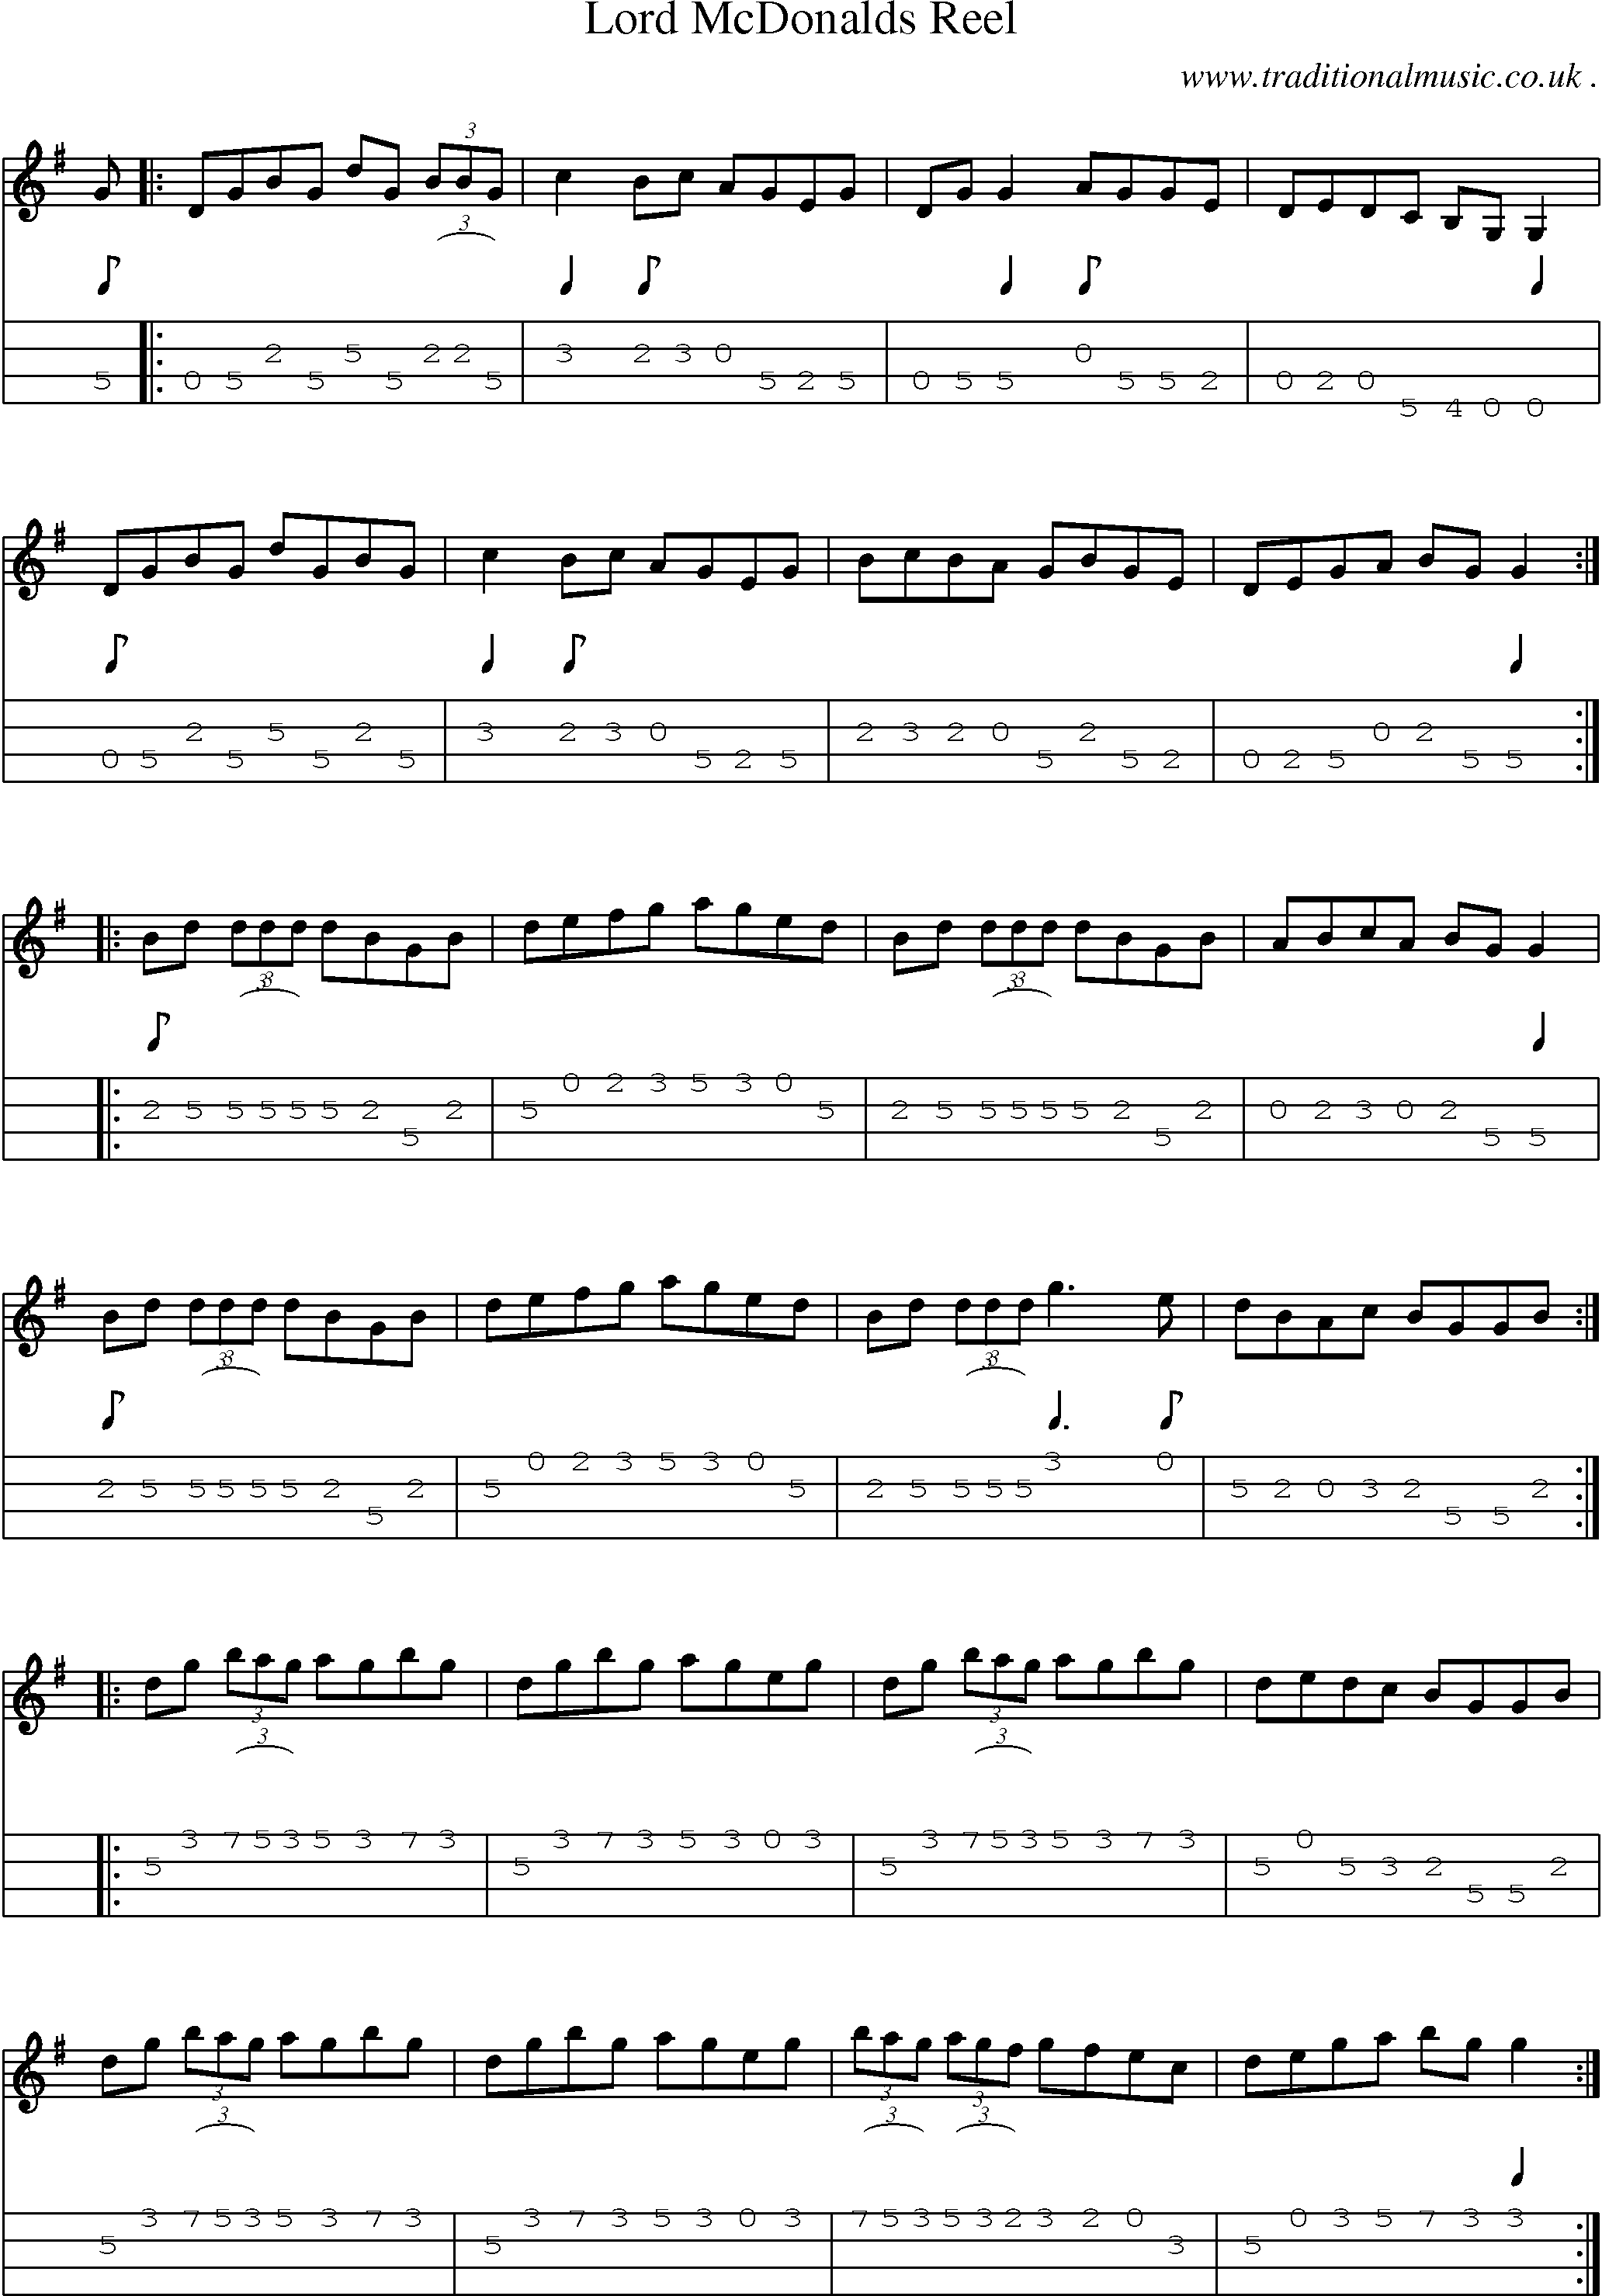 Sheet-Music and Mandolin Tabs for Lord Mcdonalds Reel